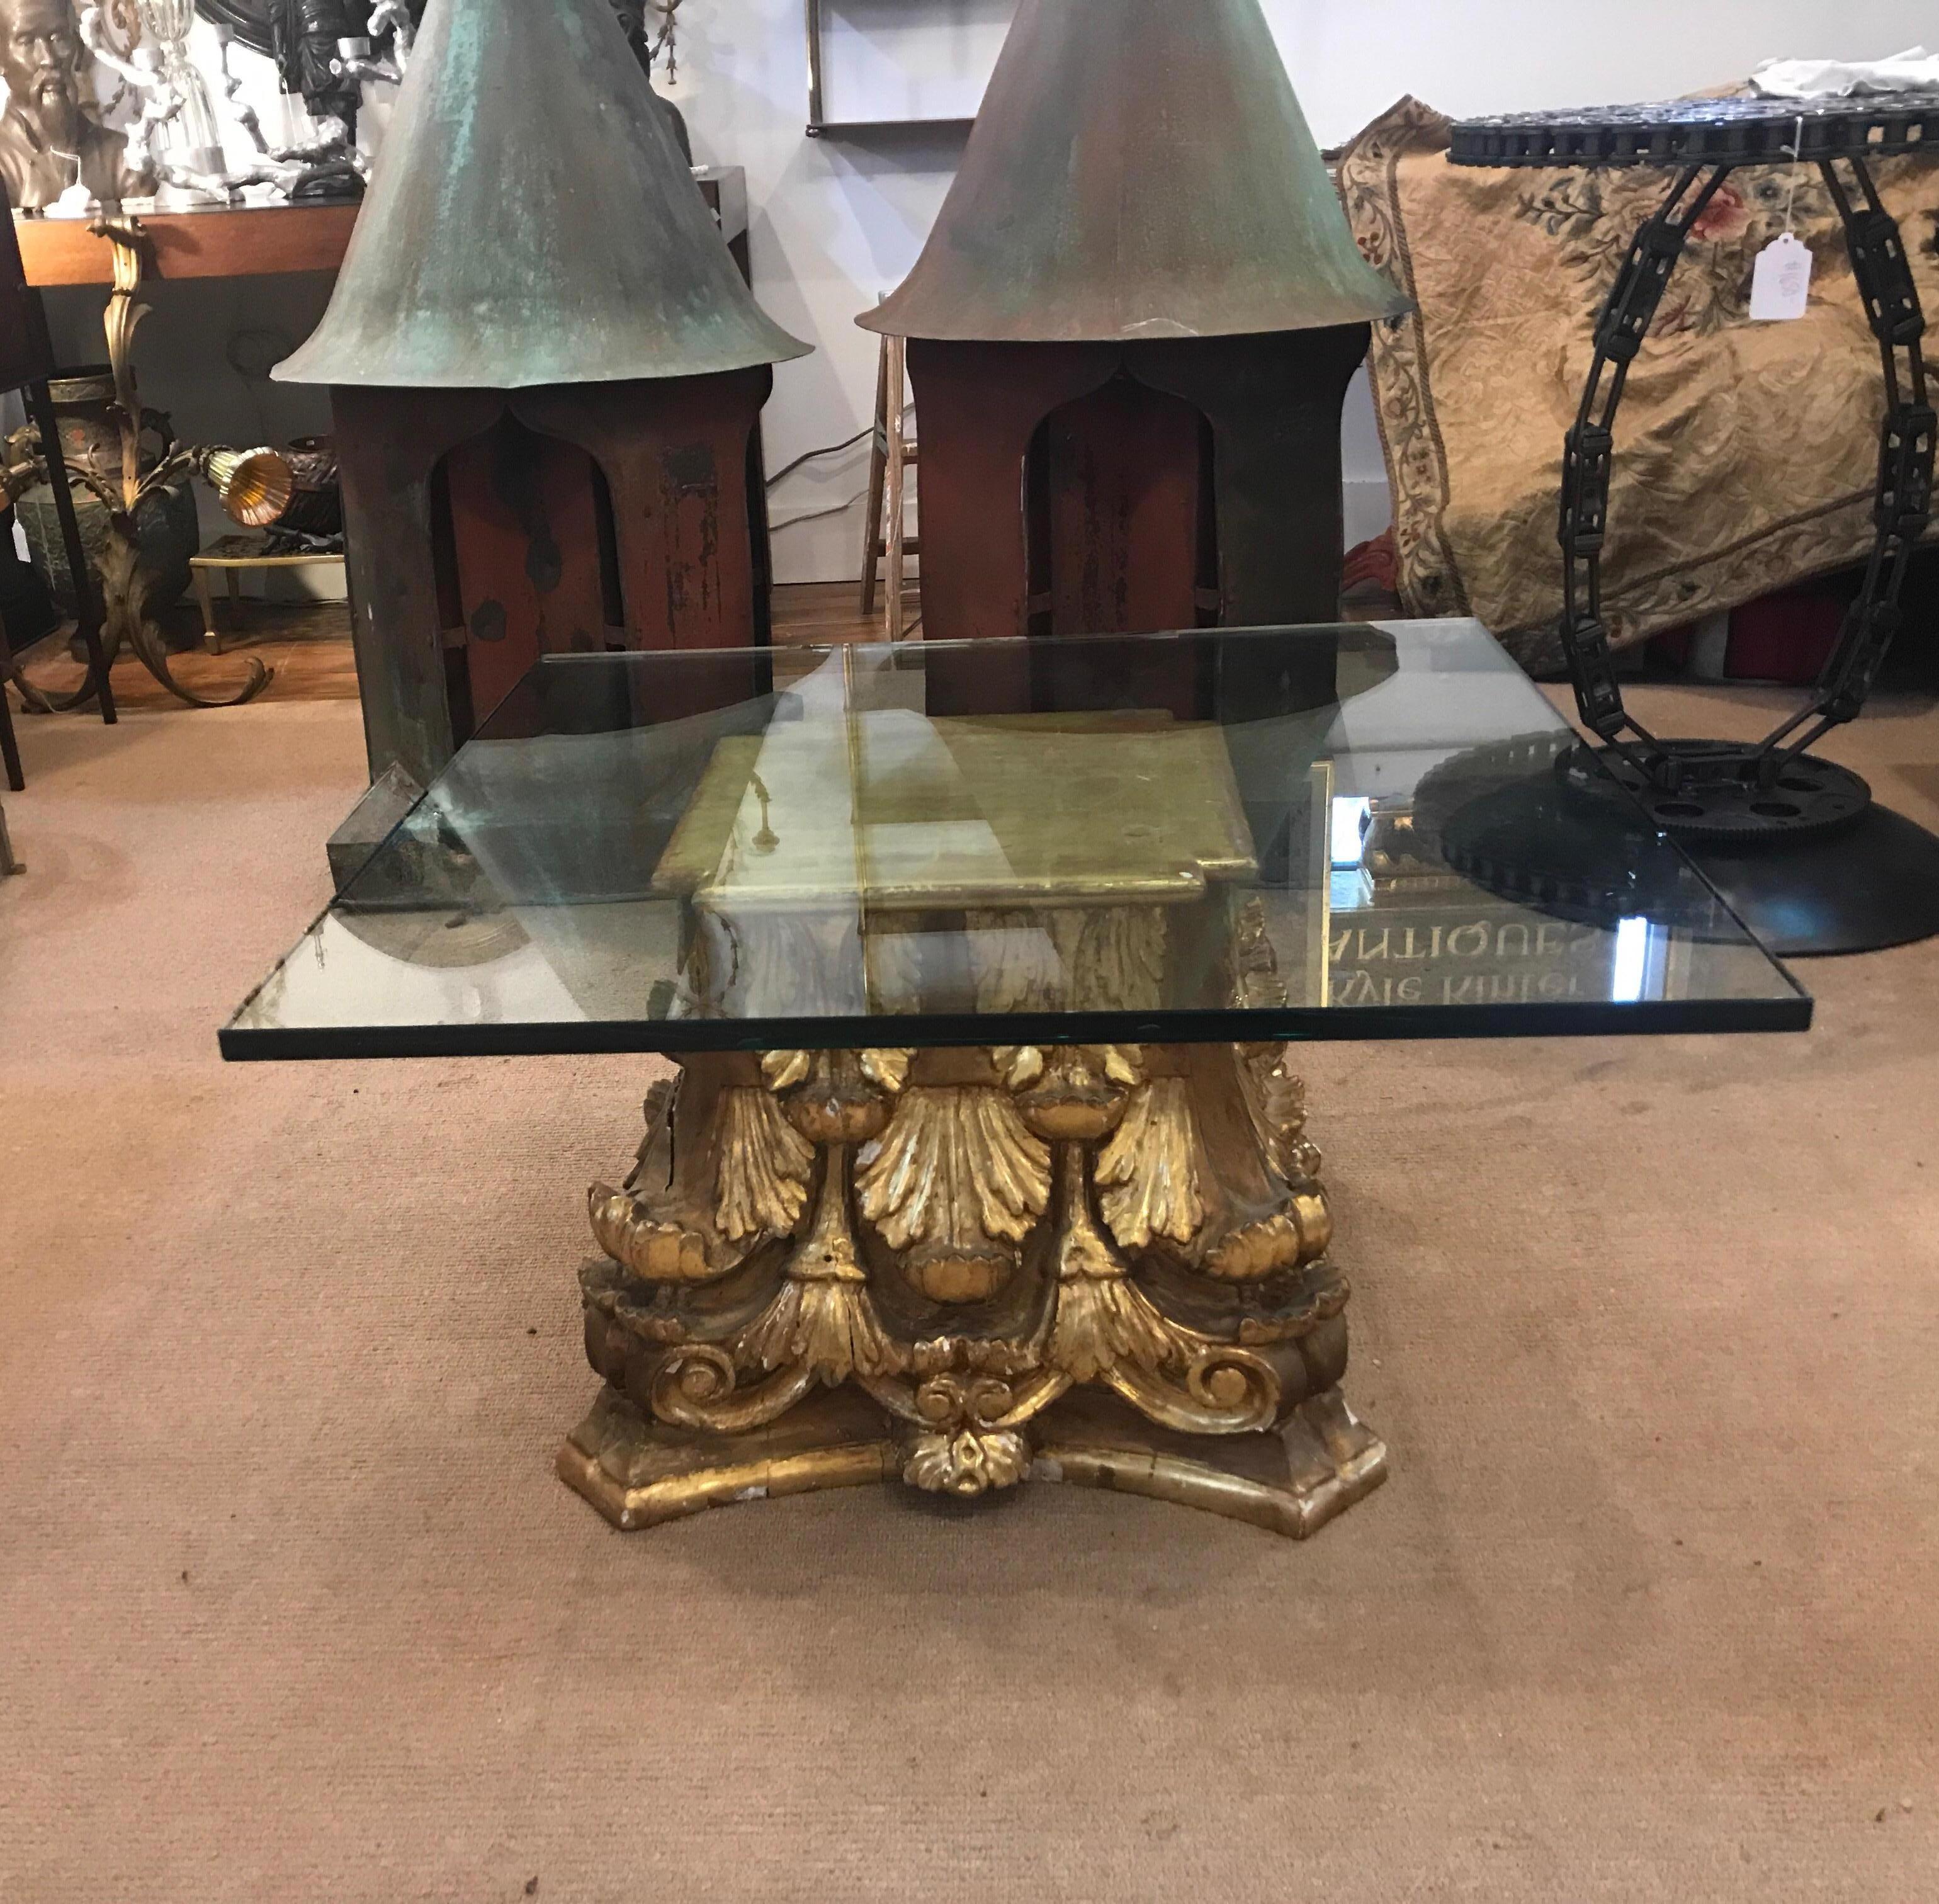 Very sophisticated hand caved giltwood and gesso antique column capital now as a coffee table. The base in a hand gilt mid to late 19th century architectural column with a hand gilt top added later and a very thick 32 inch square glass top. The